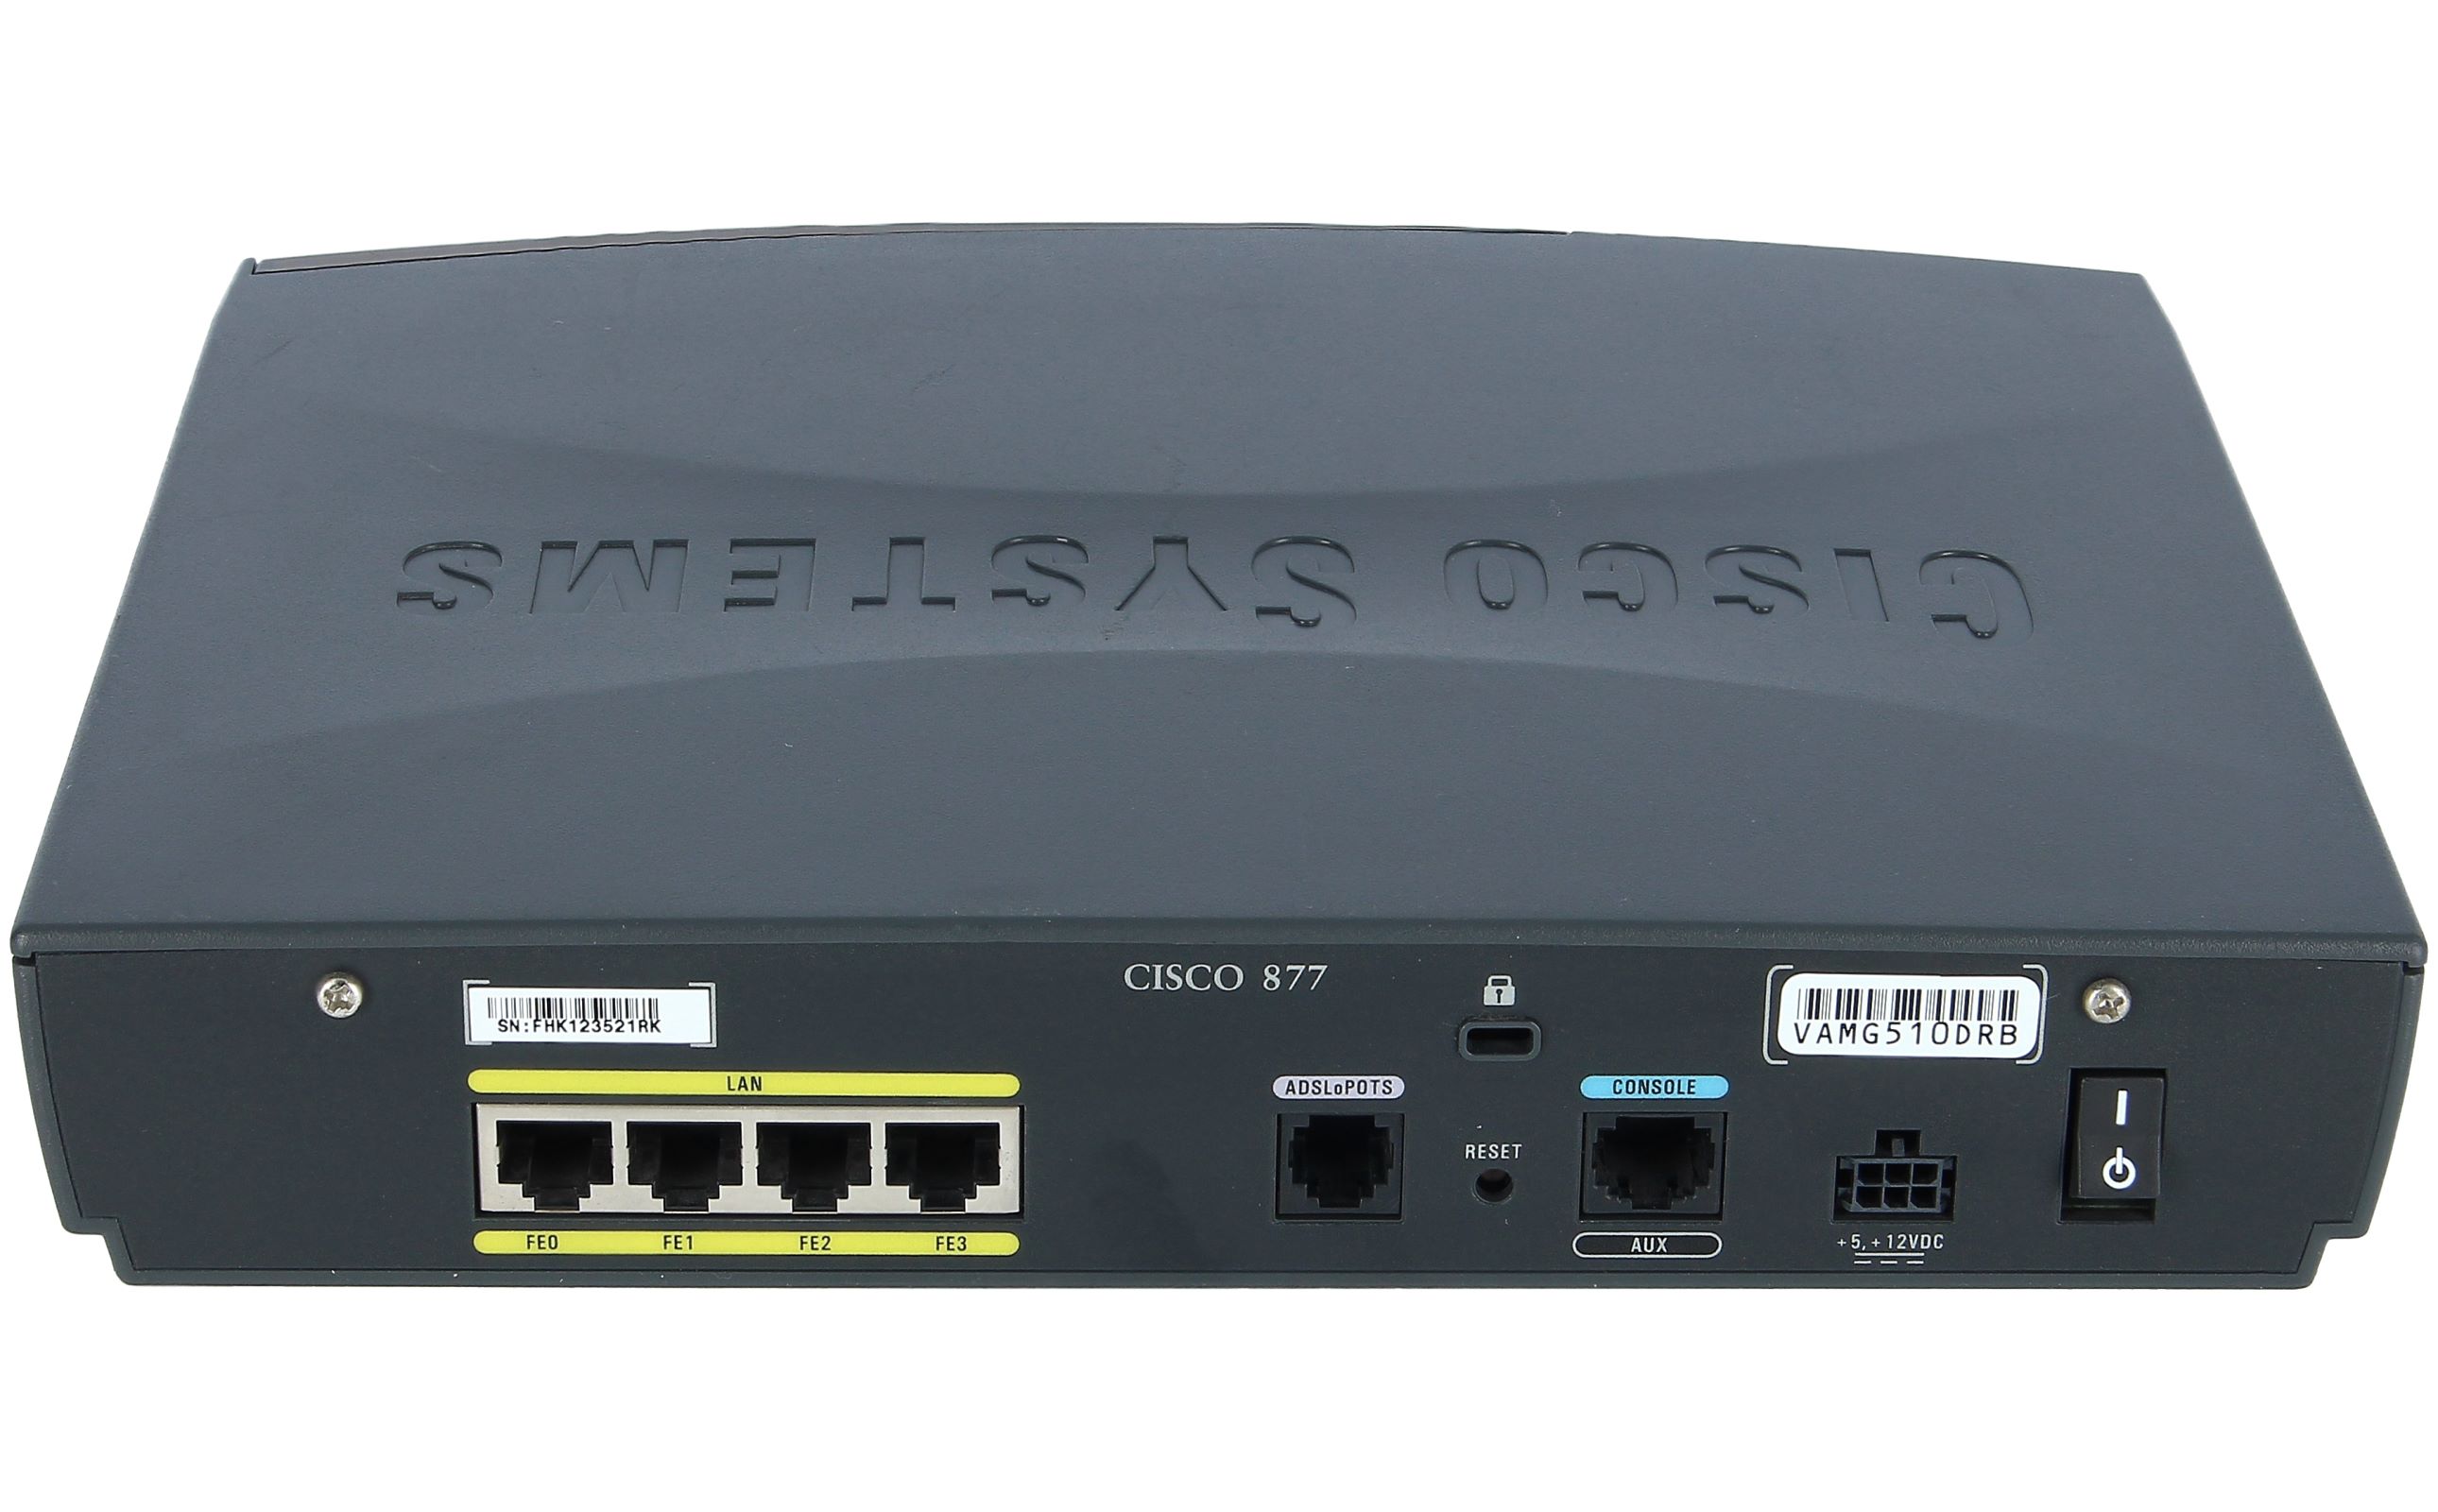 krom Decimale Caius Cisco - CISCO877-SEC-K9 - Cisco 877 Security Bundle with Advanced IP  Services new and refurbished buy online low prices